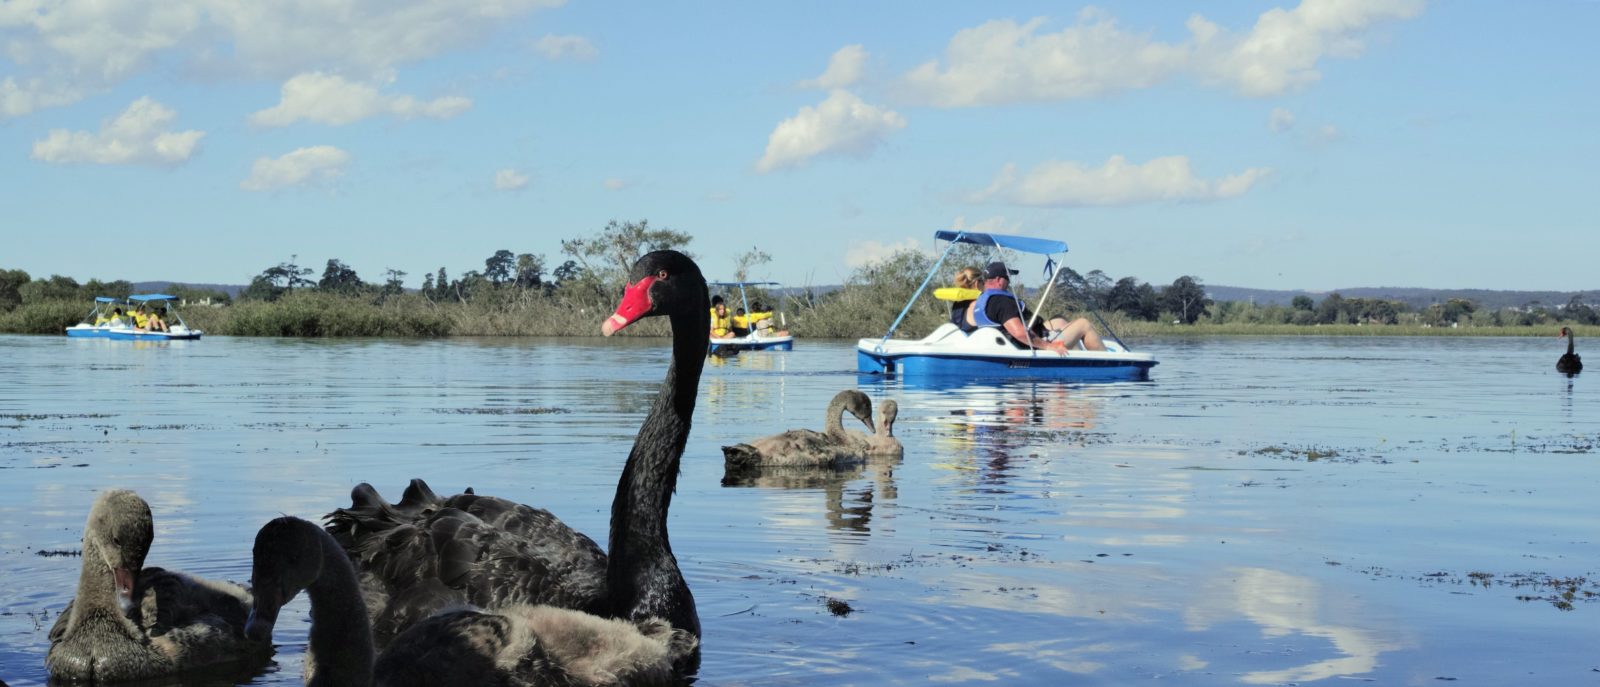 Enjoy the views and see the wildlife on Lake Wendouree